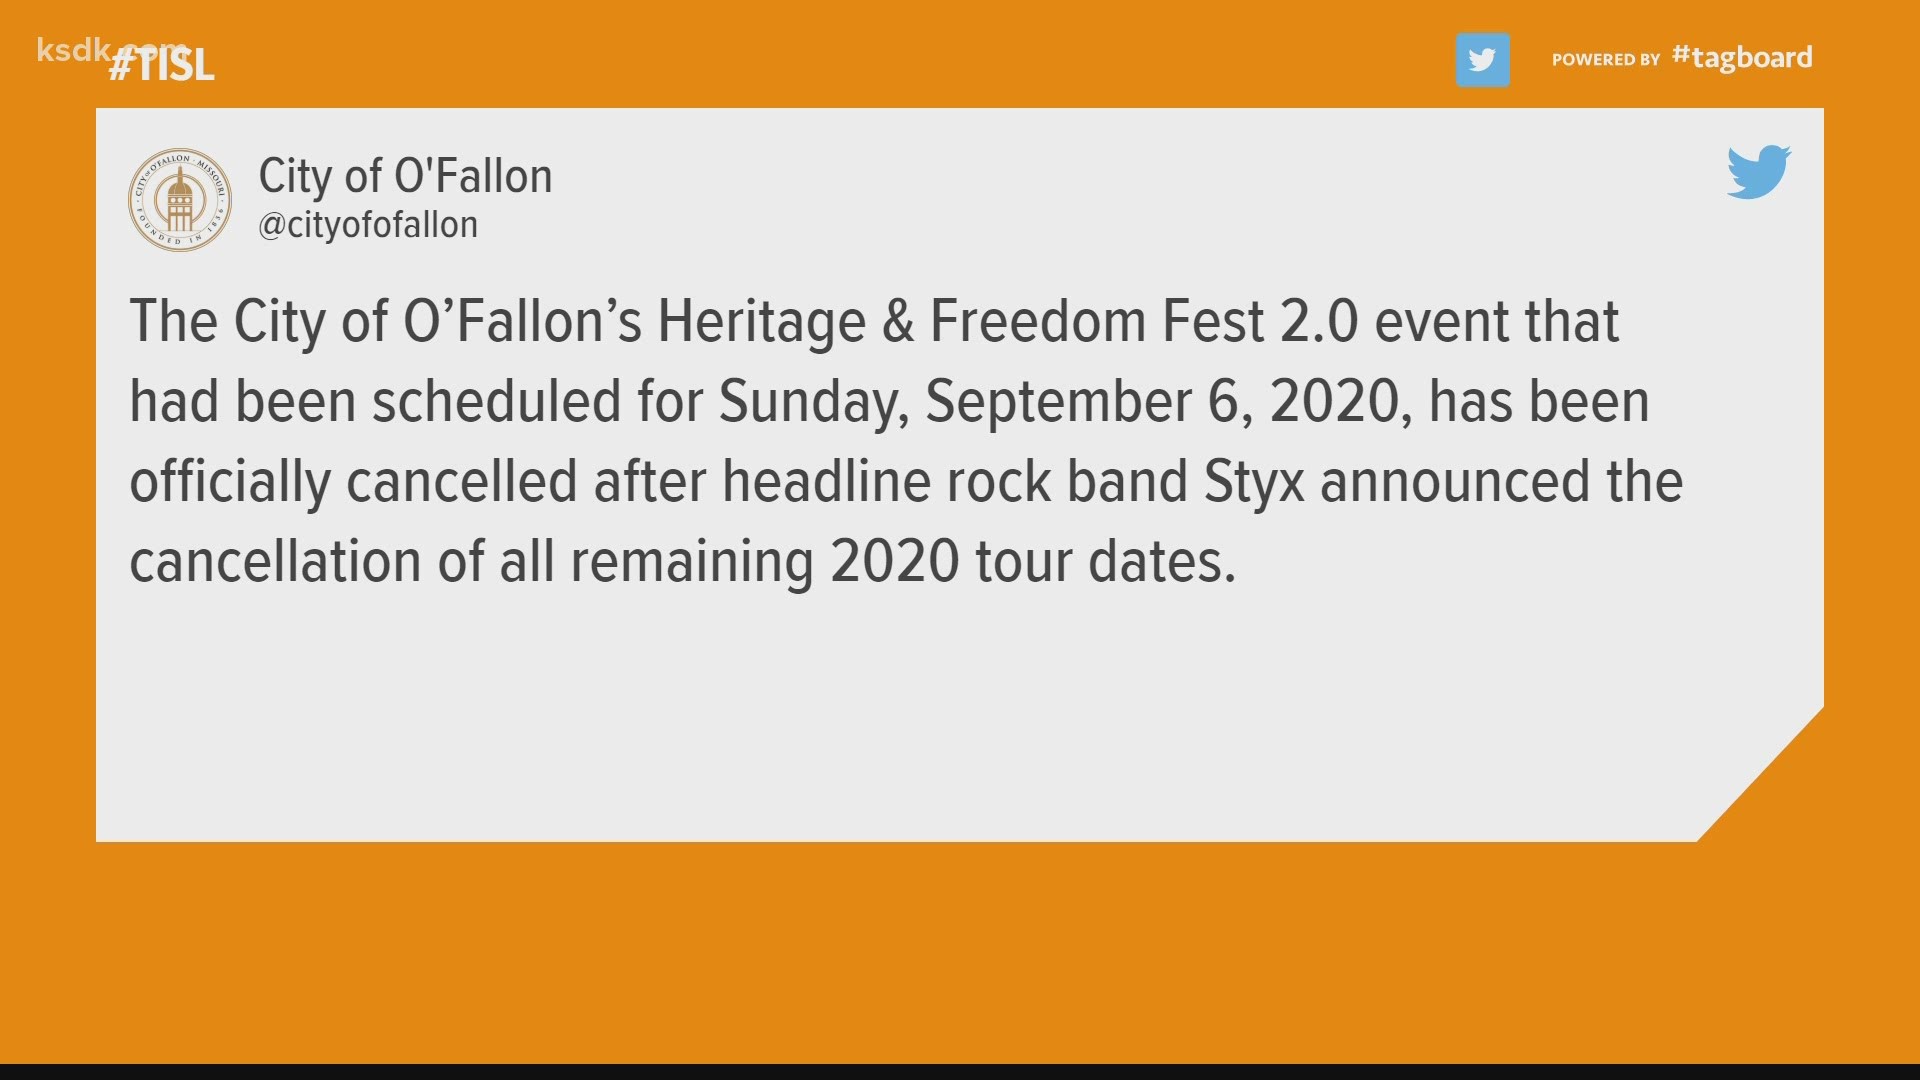 The festival had been scheduled for Labor Day weekend